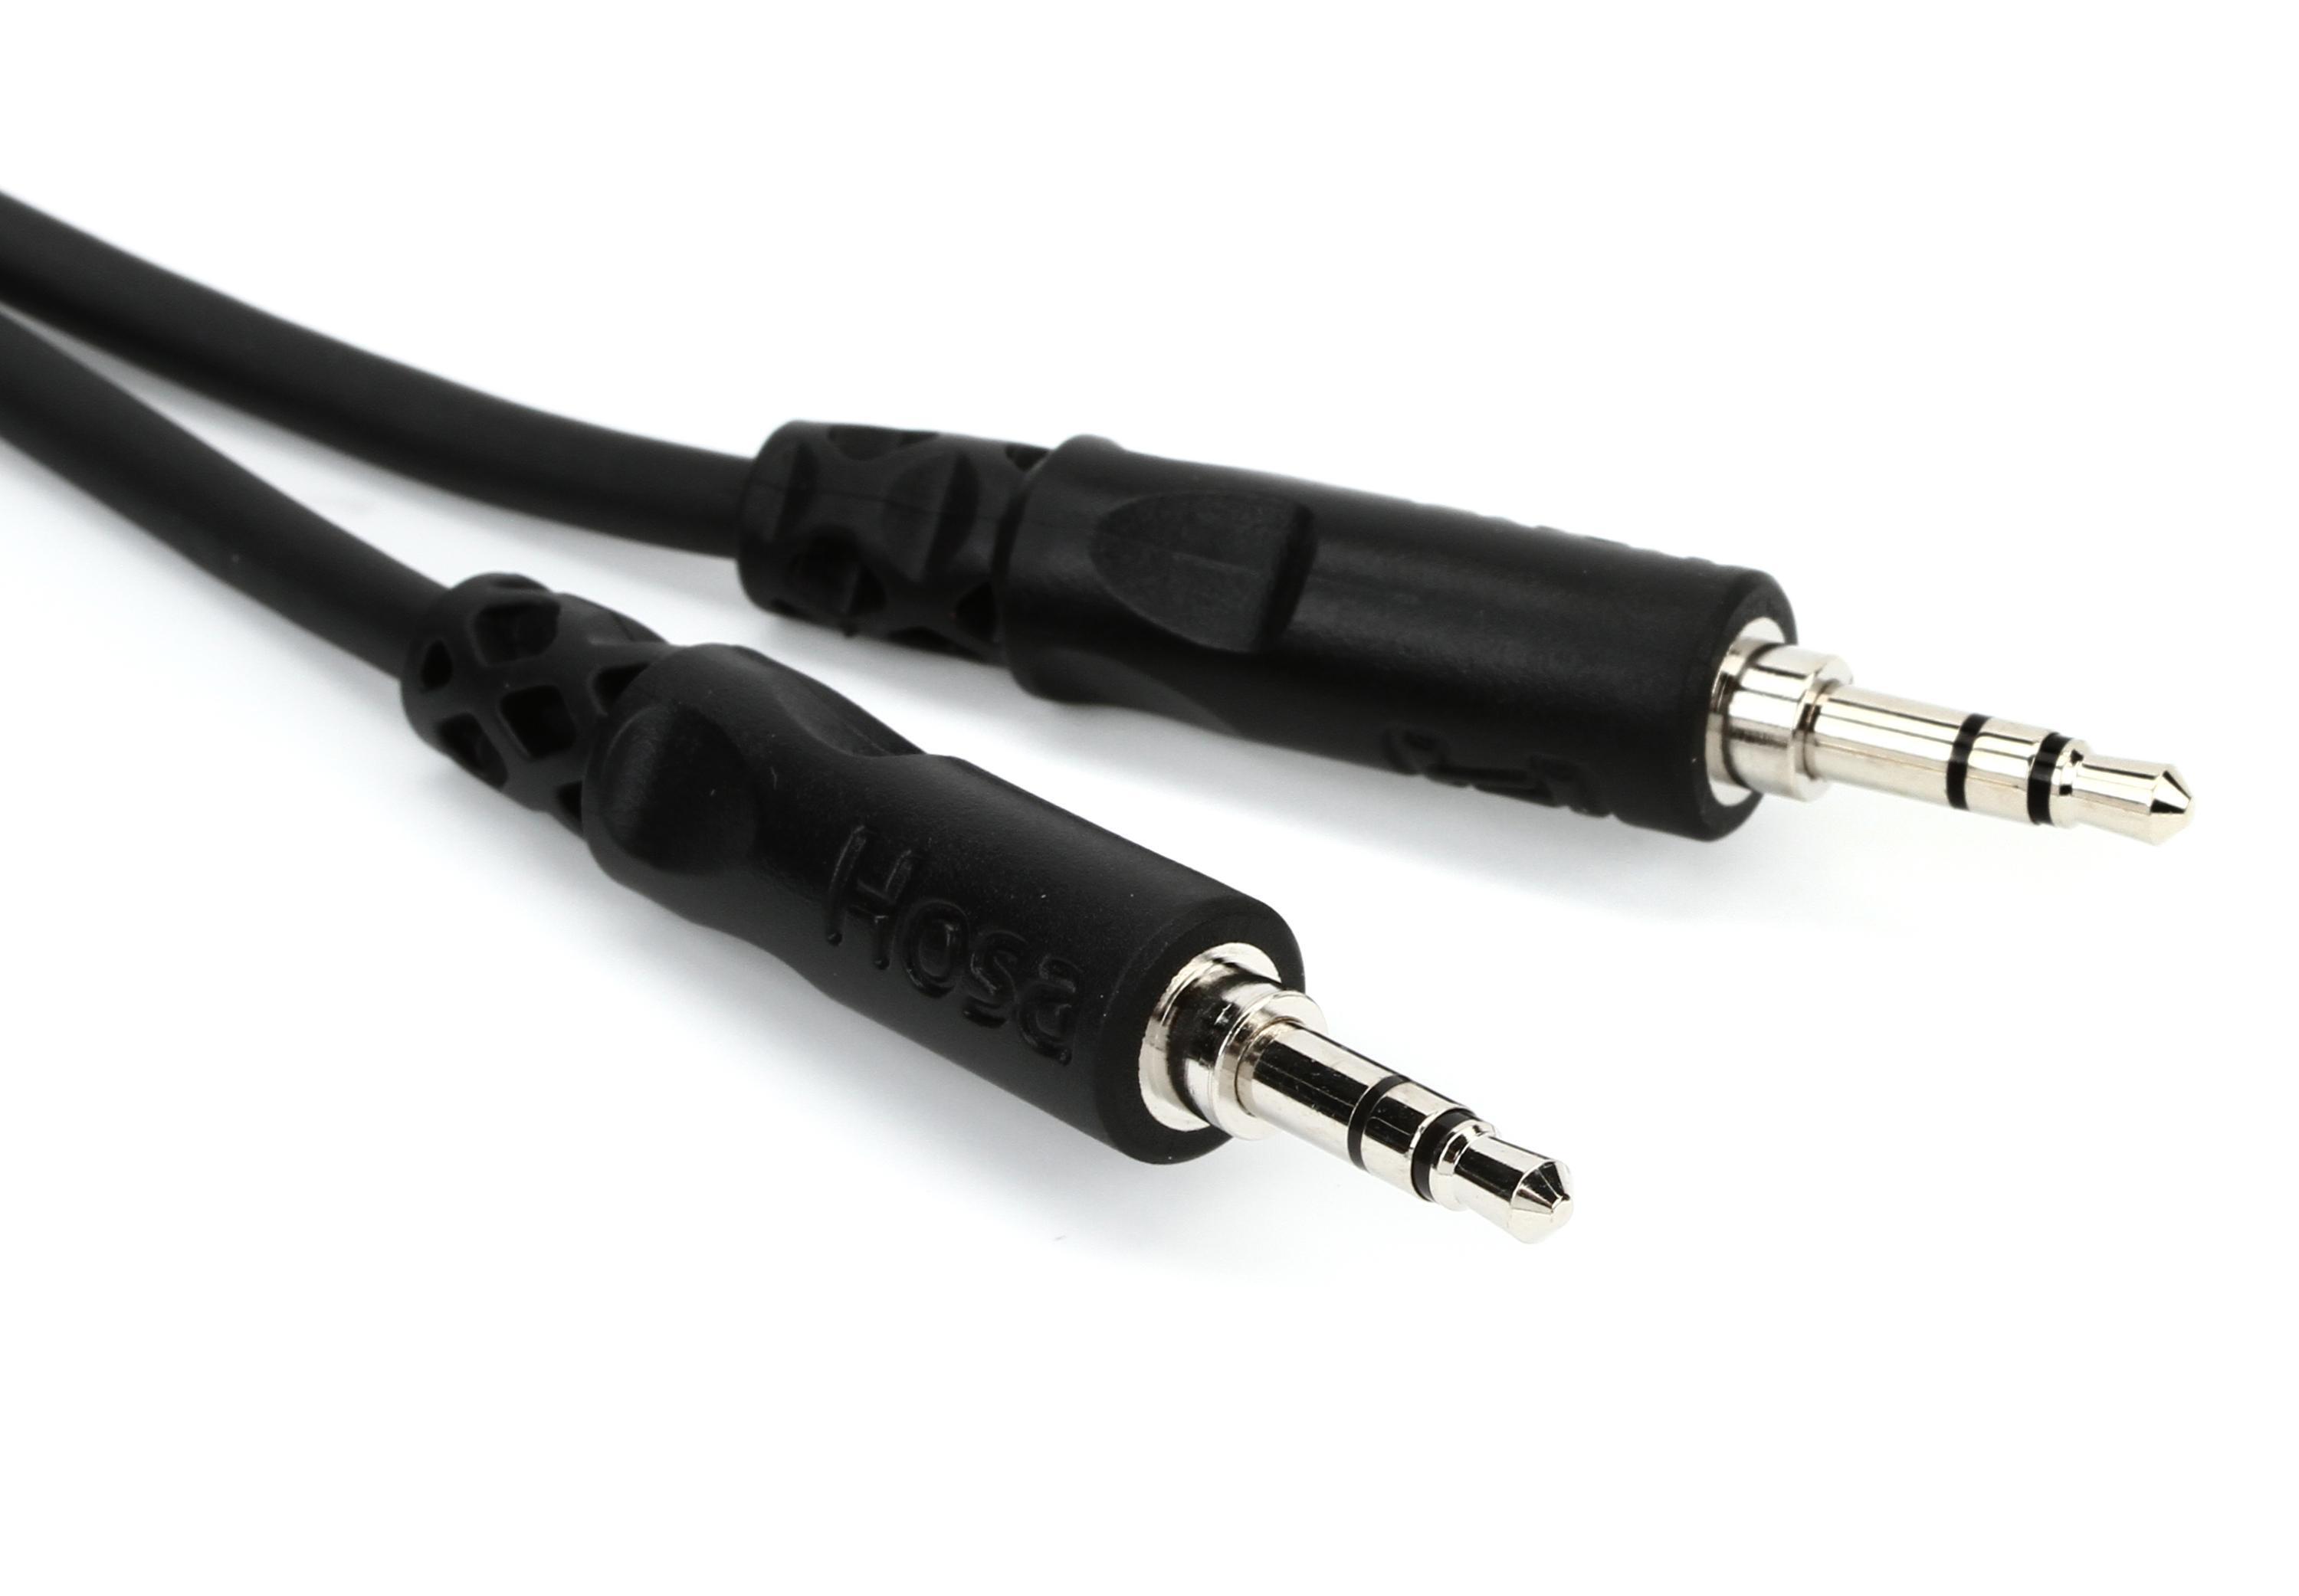 Bundled Item: Hosa CMM-110 Stereo Interconnect Cable - 3.5mm TRS Male to 3.5mm TRS Male - 10 foot